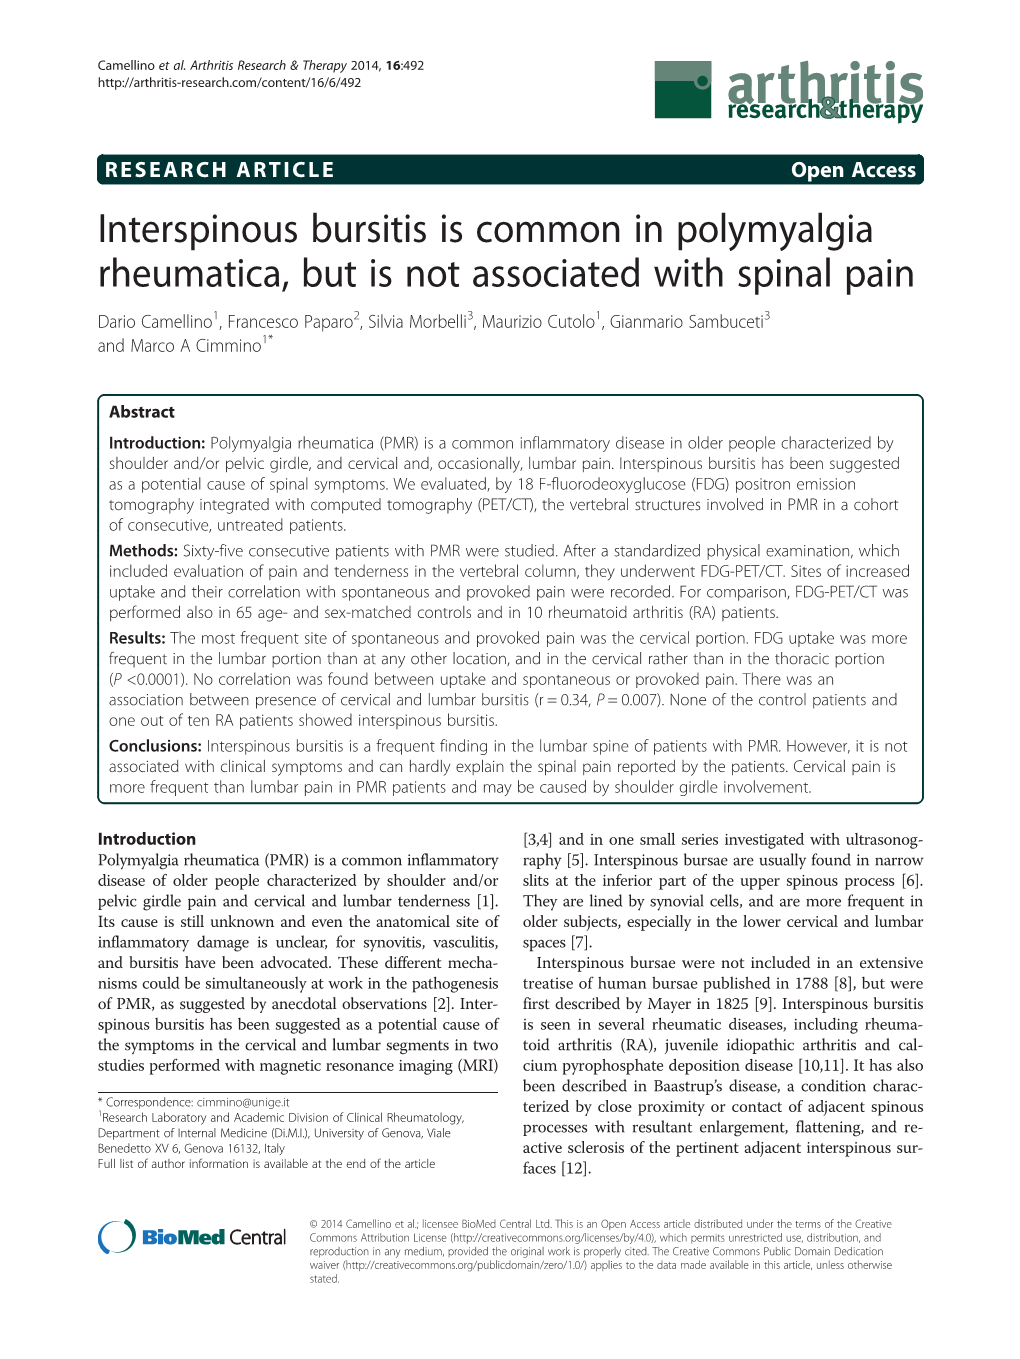 Interspinous Bursitis Is Common in Polymyalgia Rheumatica, but Is Not